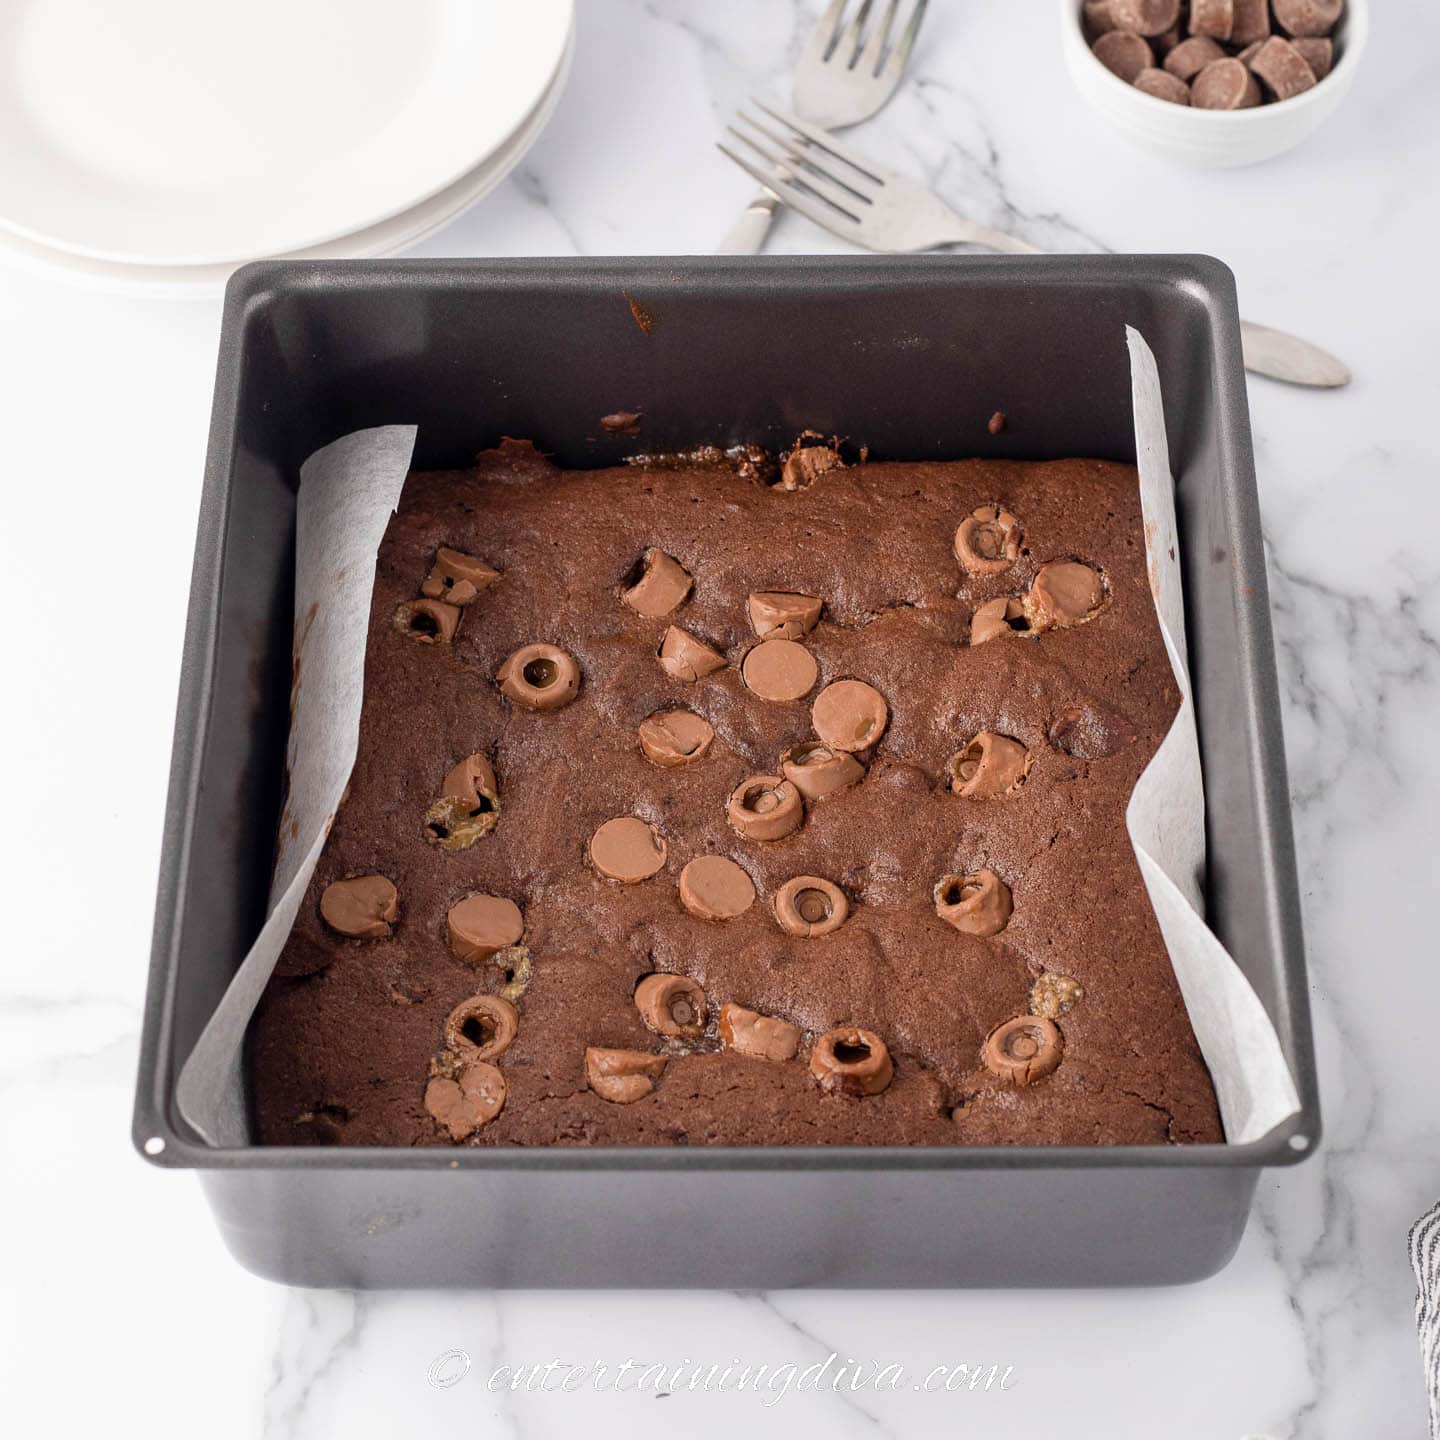 Rolo brownies in the square pan after baking